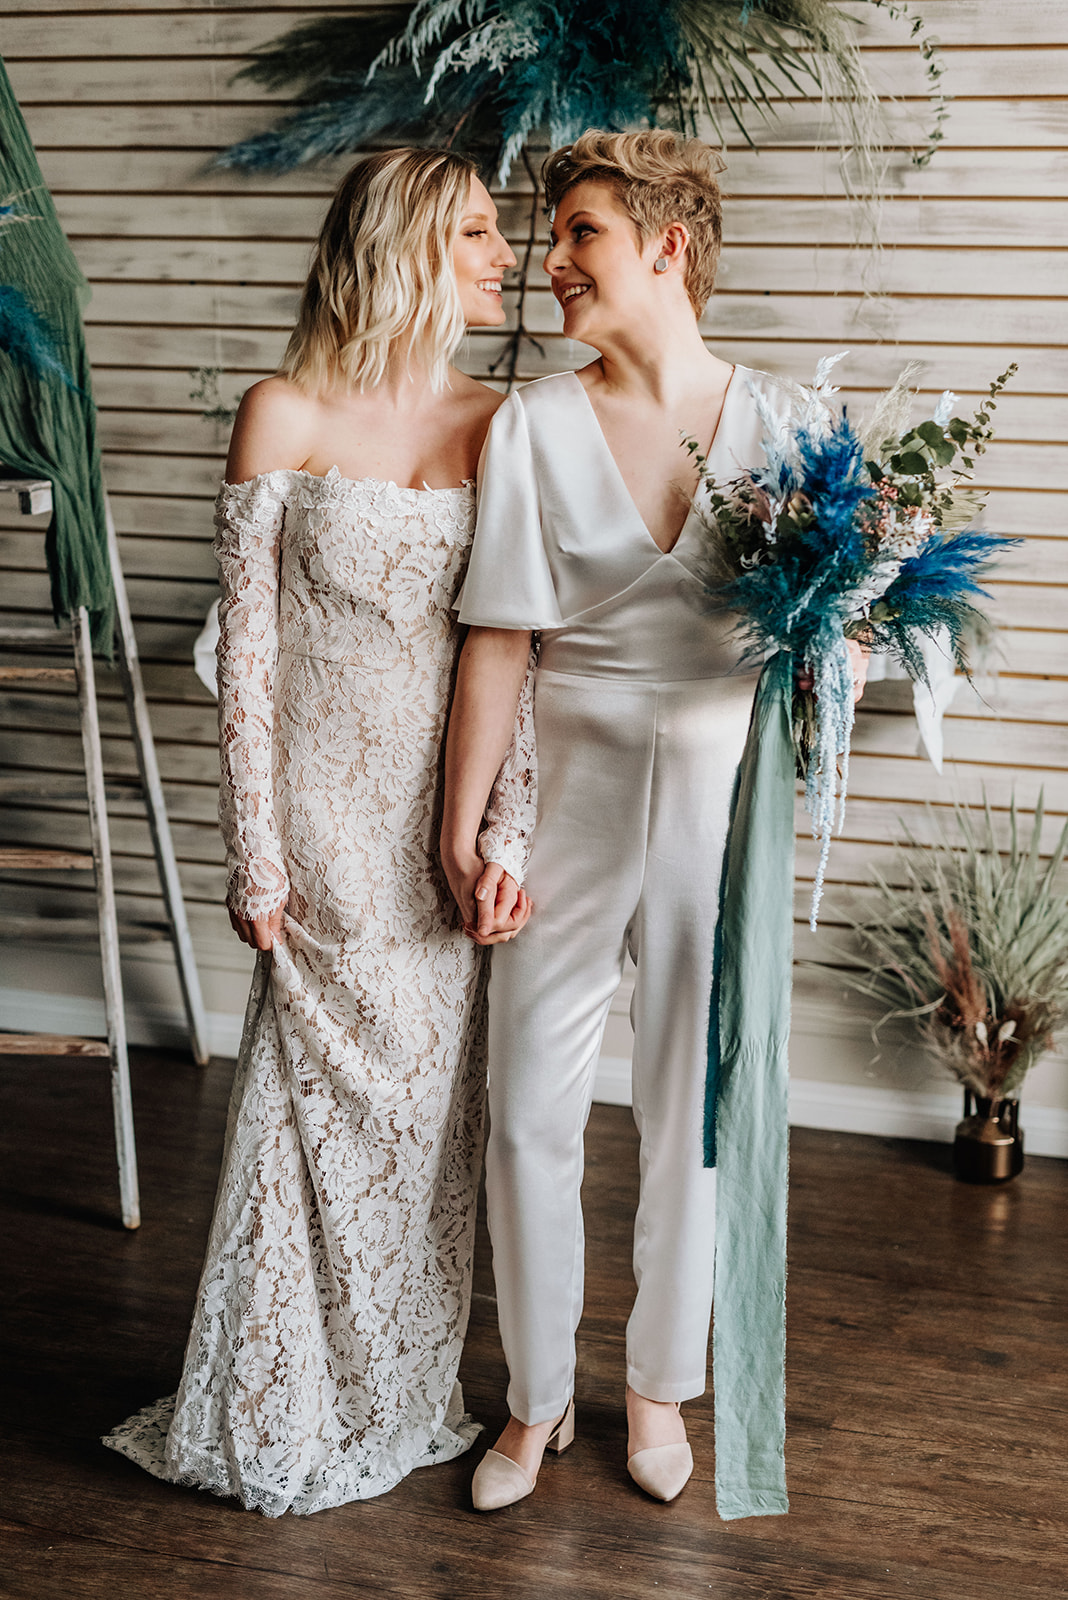 Brides pose hand in hand with a blue bohemian bouquet for this hair salon elopement